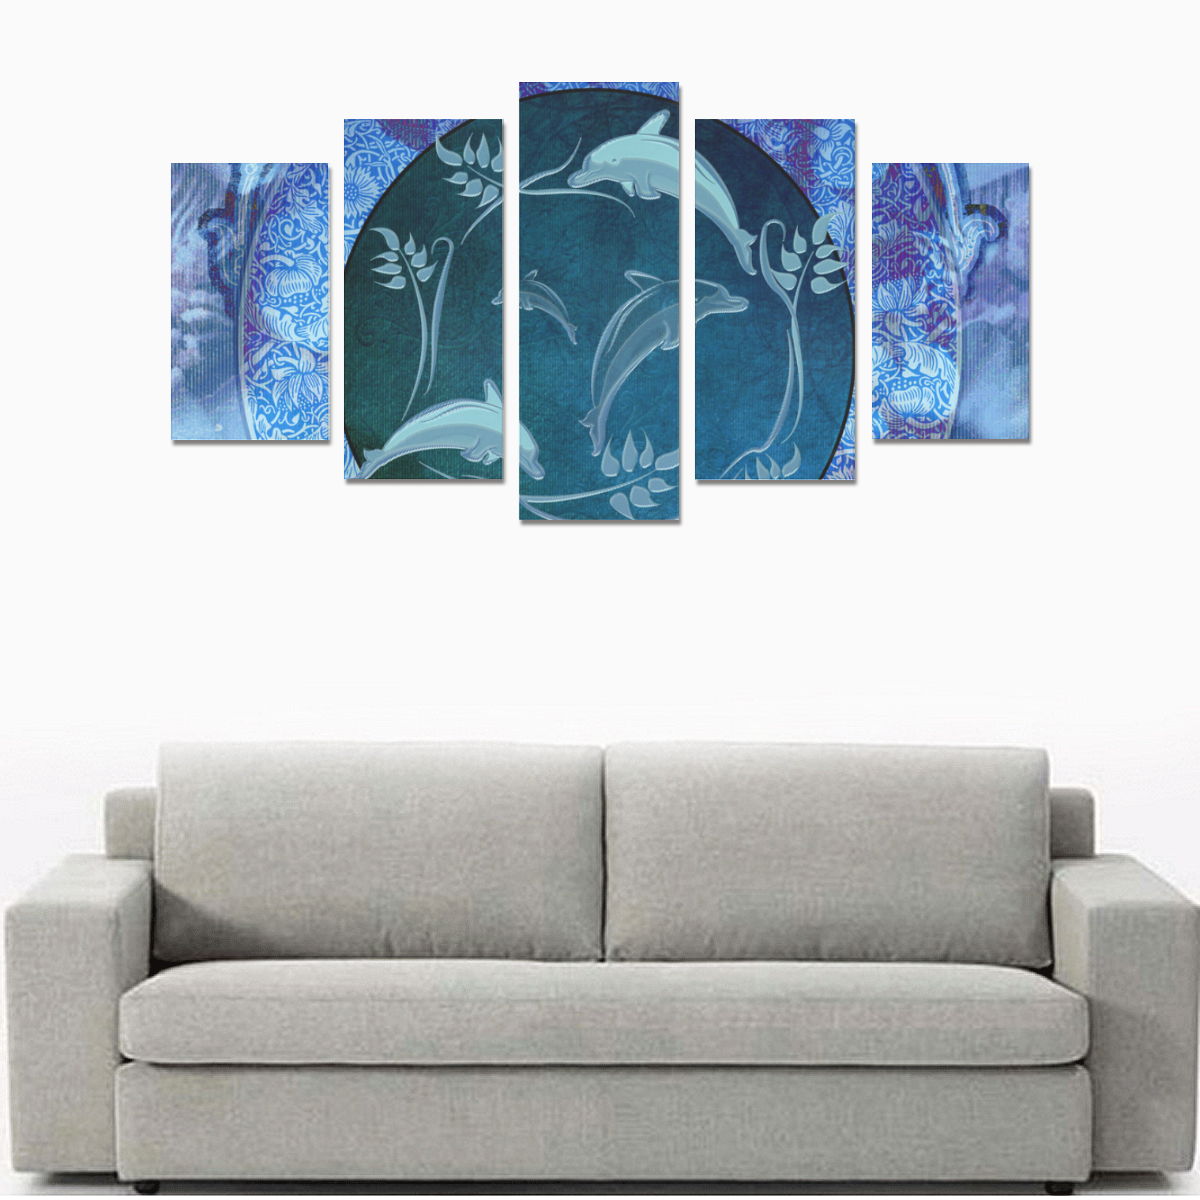 Dolphin with floral elelements Canvas Print Sets A (No Frame)